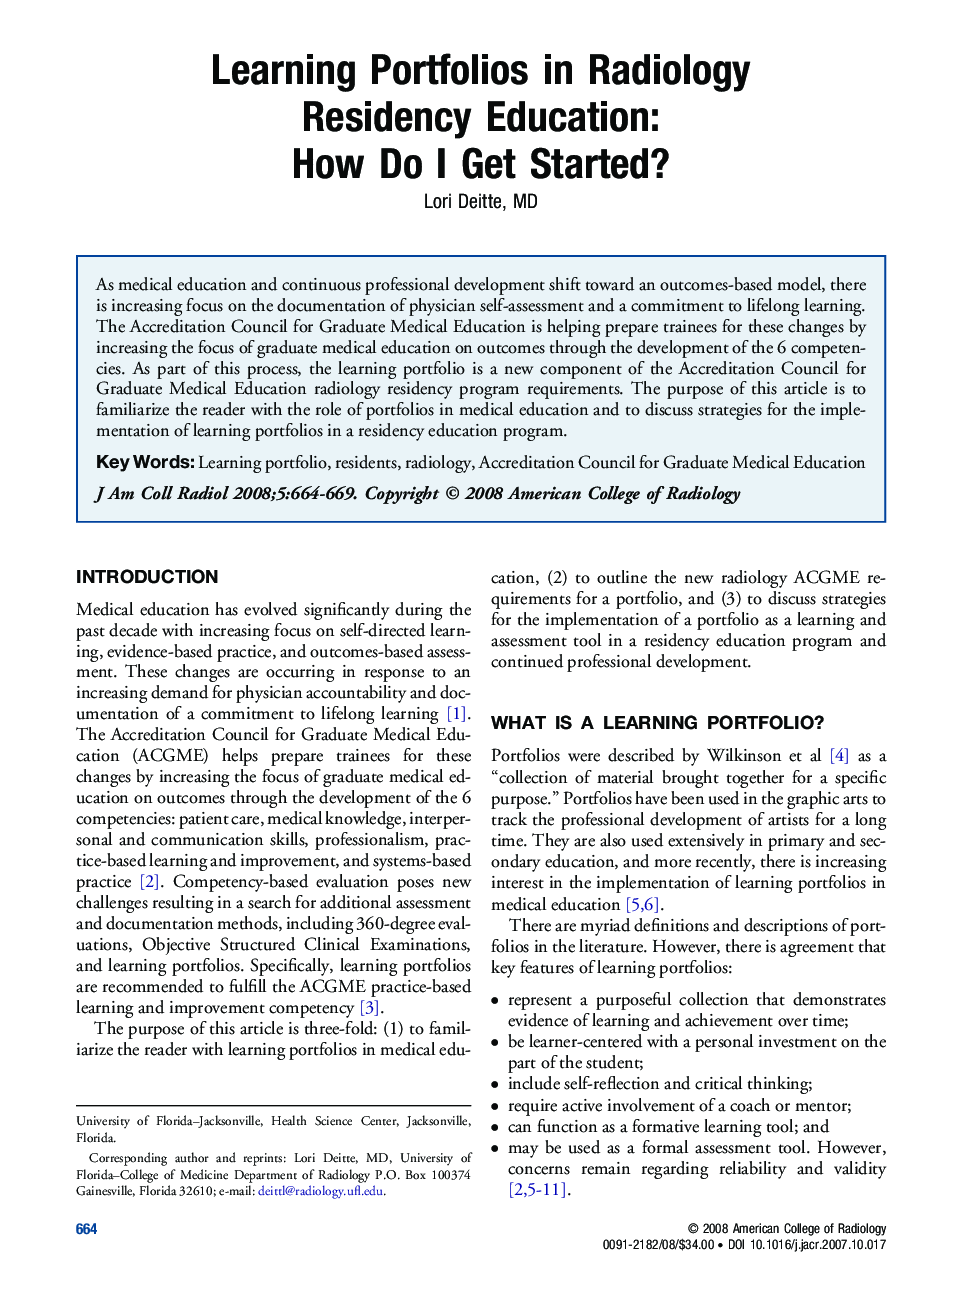 Learning Portfolios in Radiology Residency Education: How Do I Get Started?